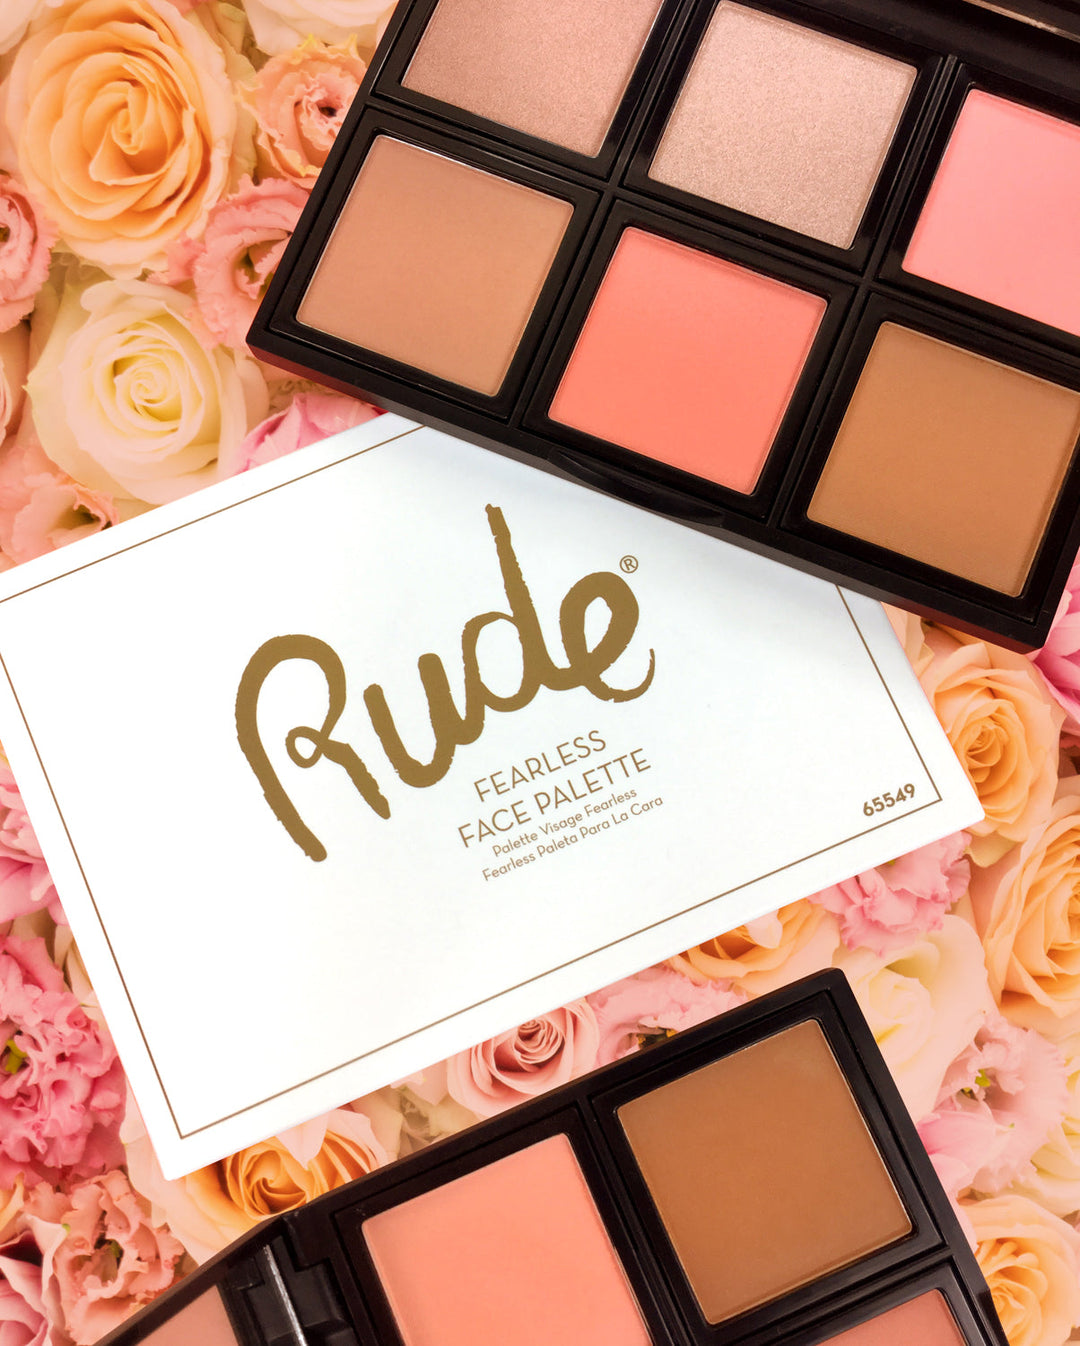 RUDE Fearless Face Palette